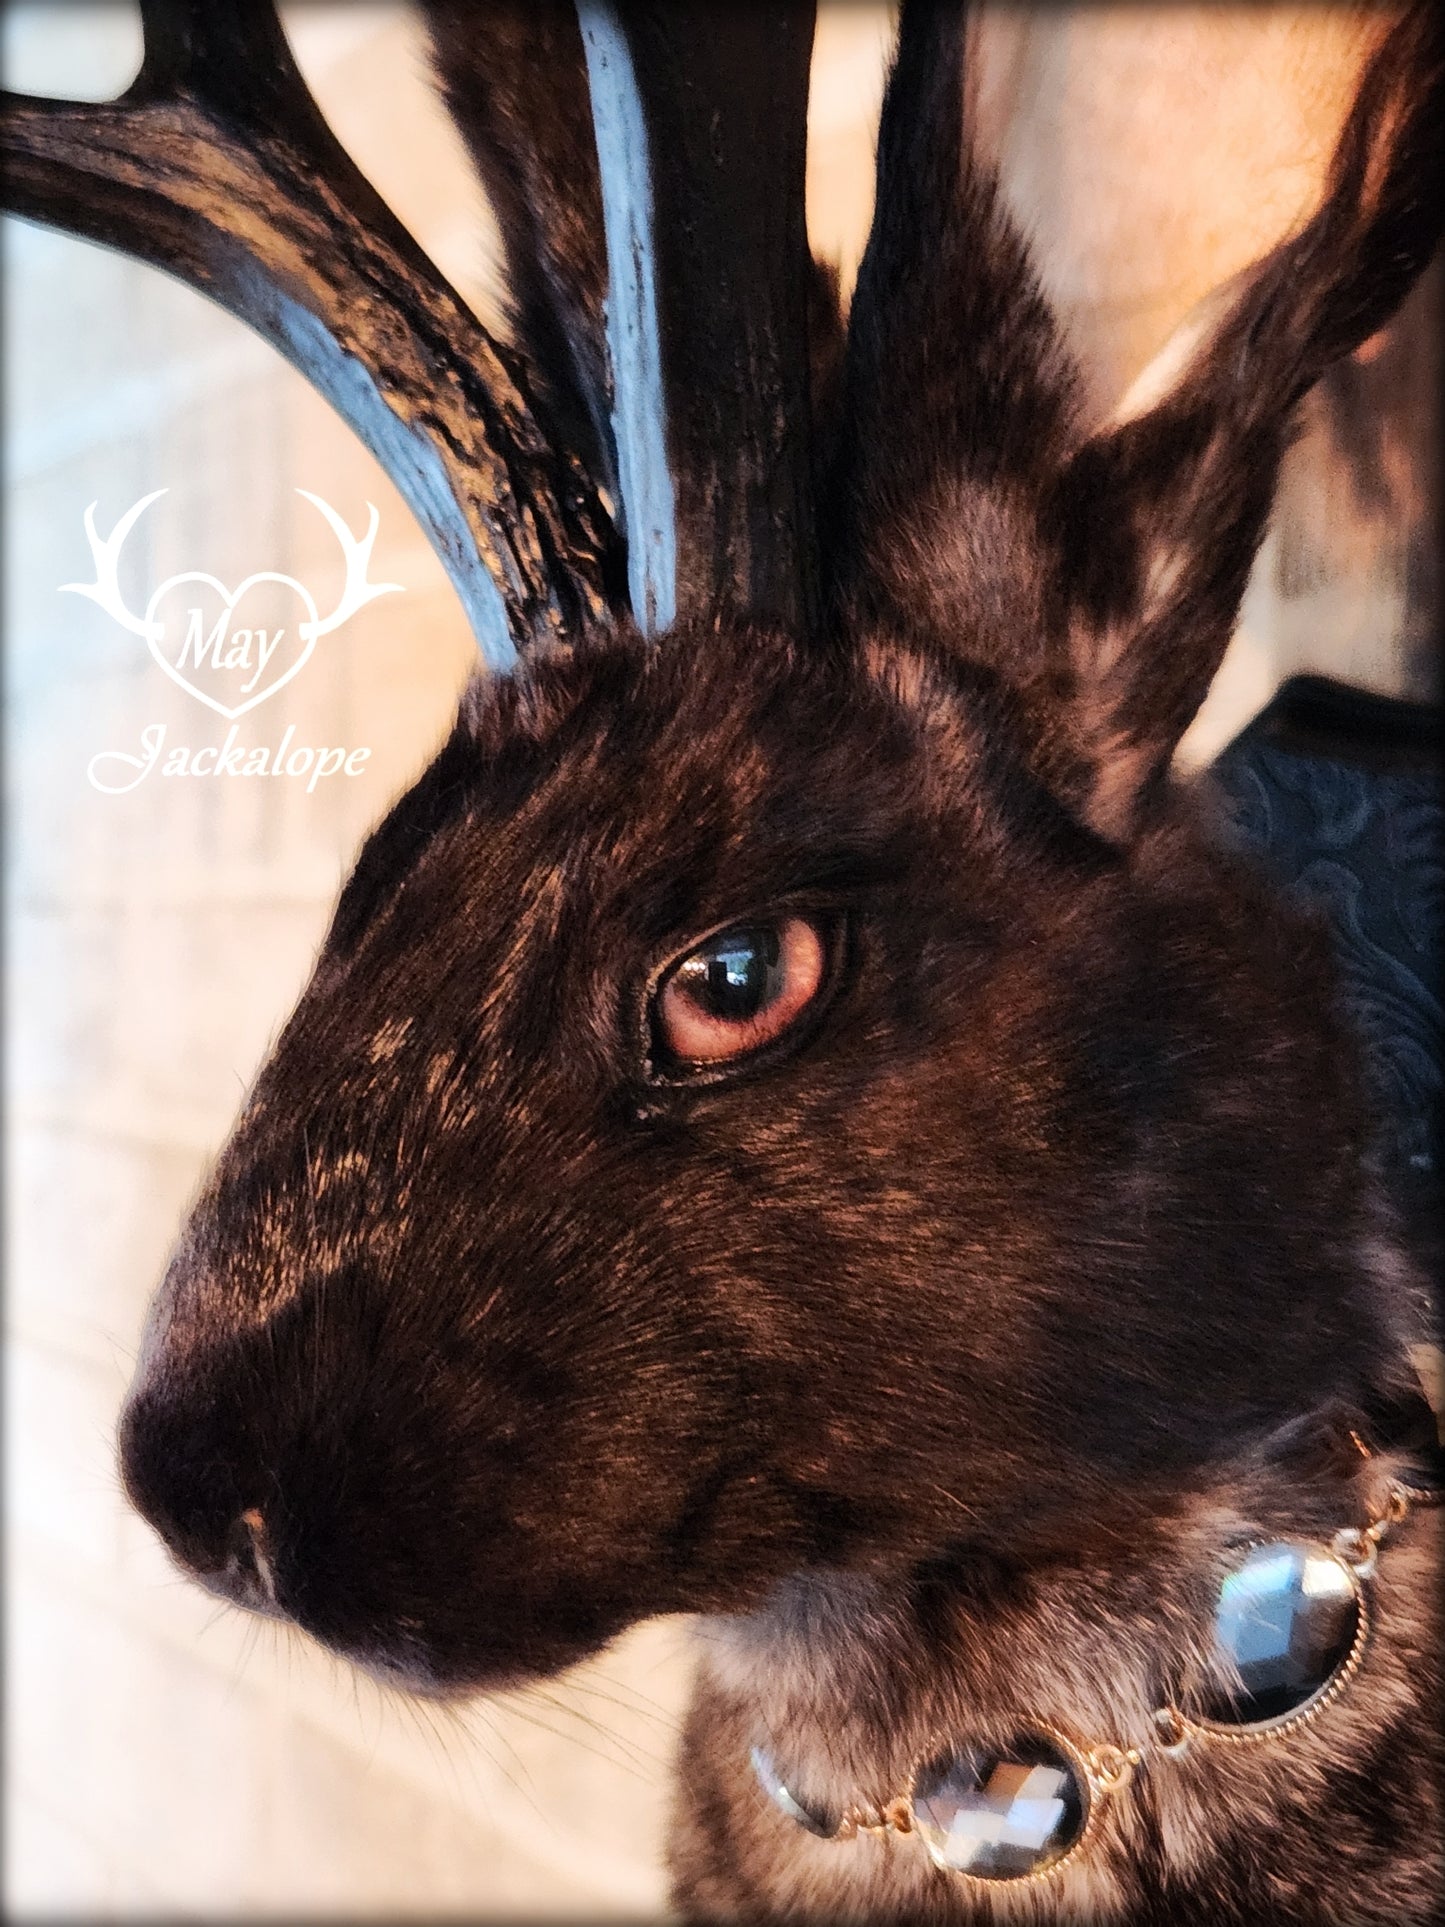 Black & grey Jackalope taxidermy with black antlers replica, heterochromia eyes on a decorated plaque.